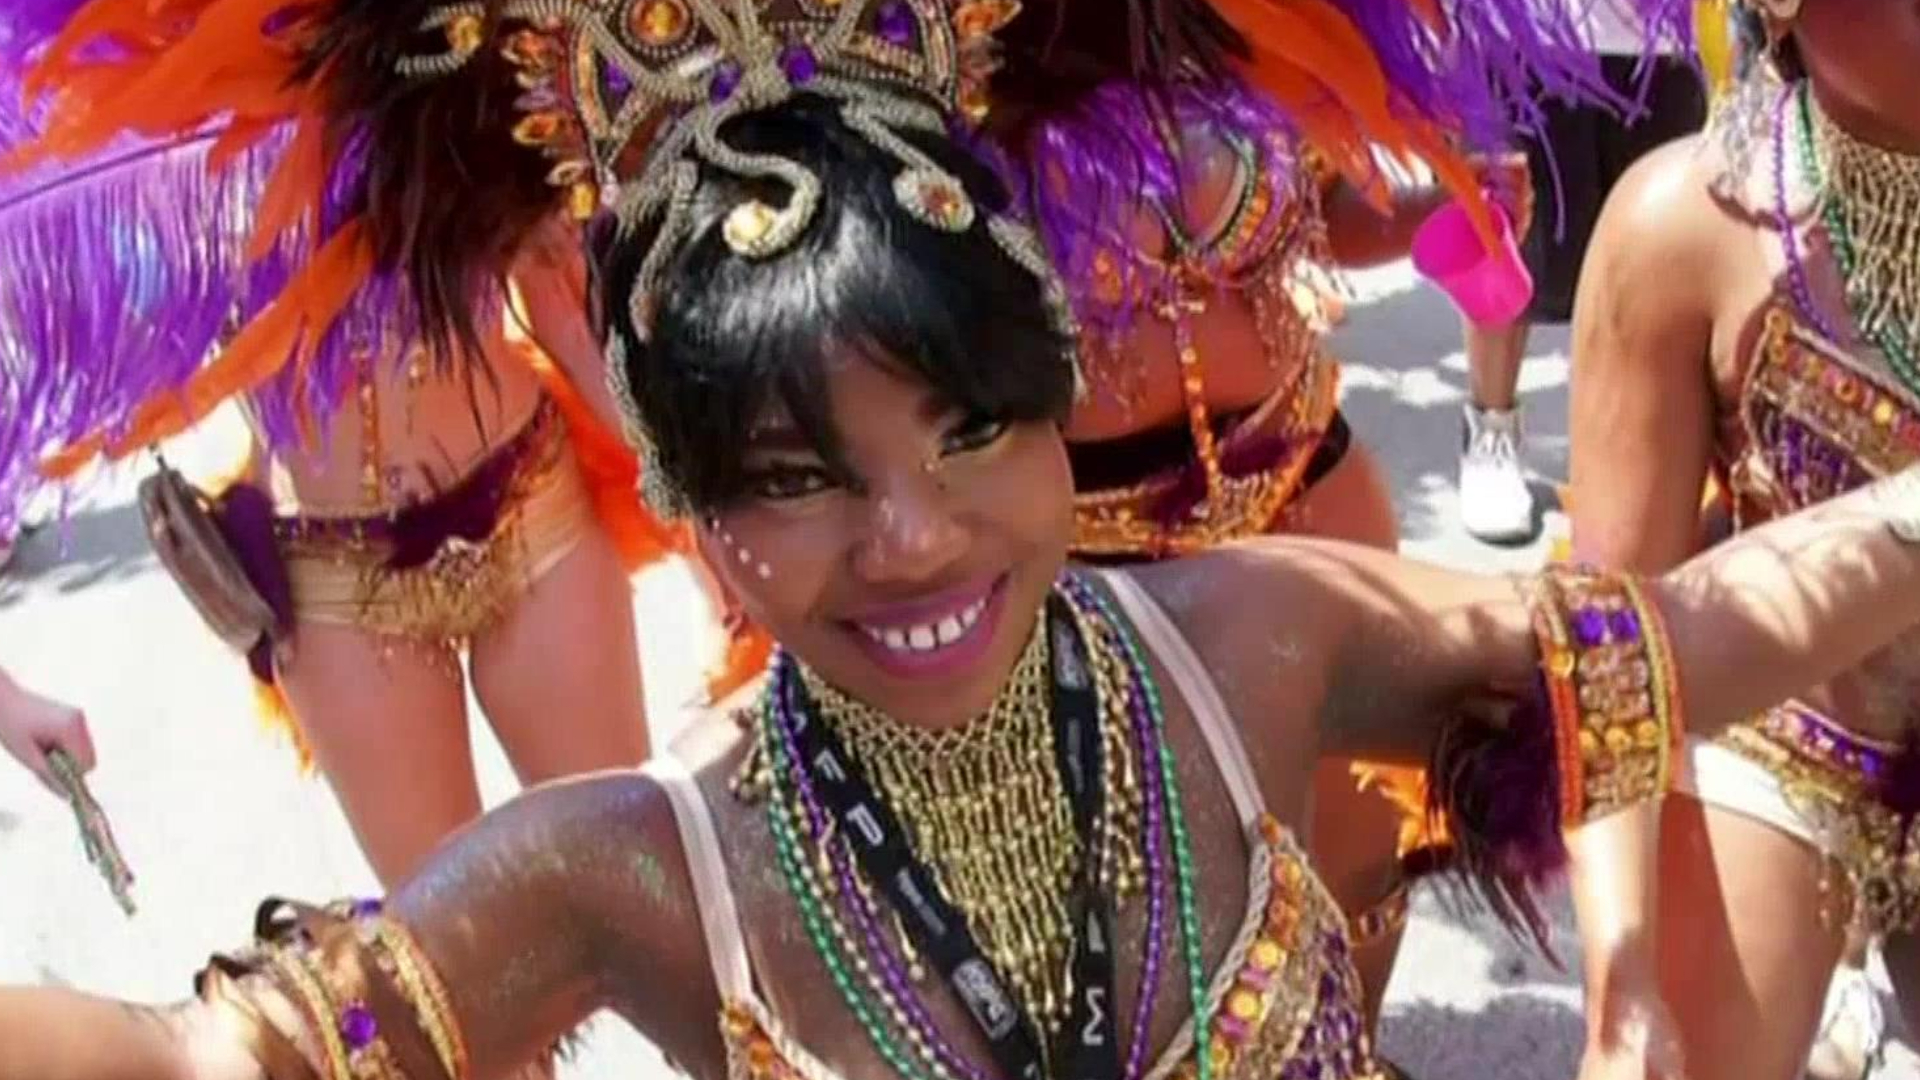 Caribbean carnival parade returns to Montreal this summer